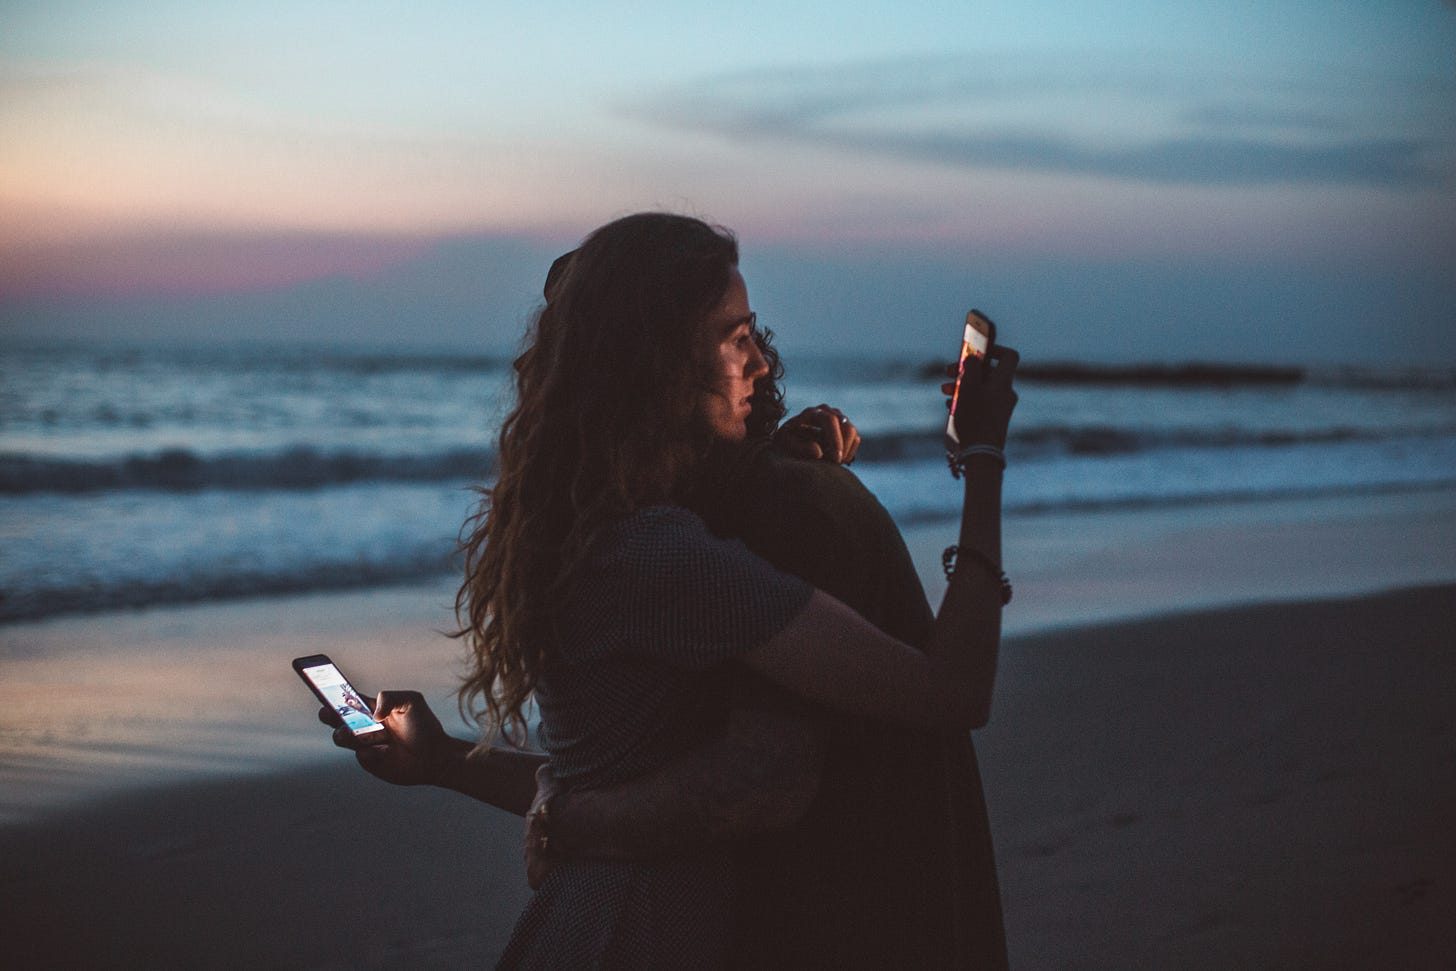 Couple hugging on the beach by the ocean at sundown ignoring the sunset and each other to stare at their phones behind each other's backs.